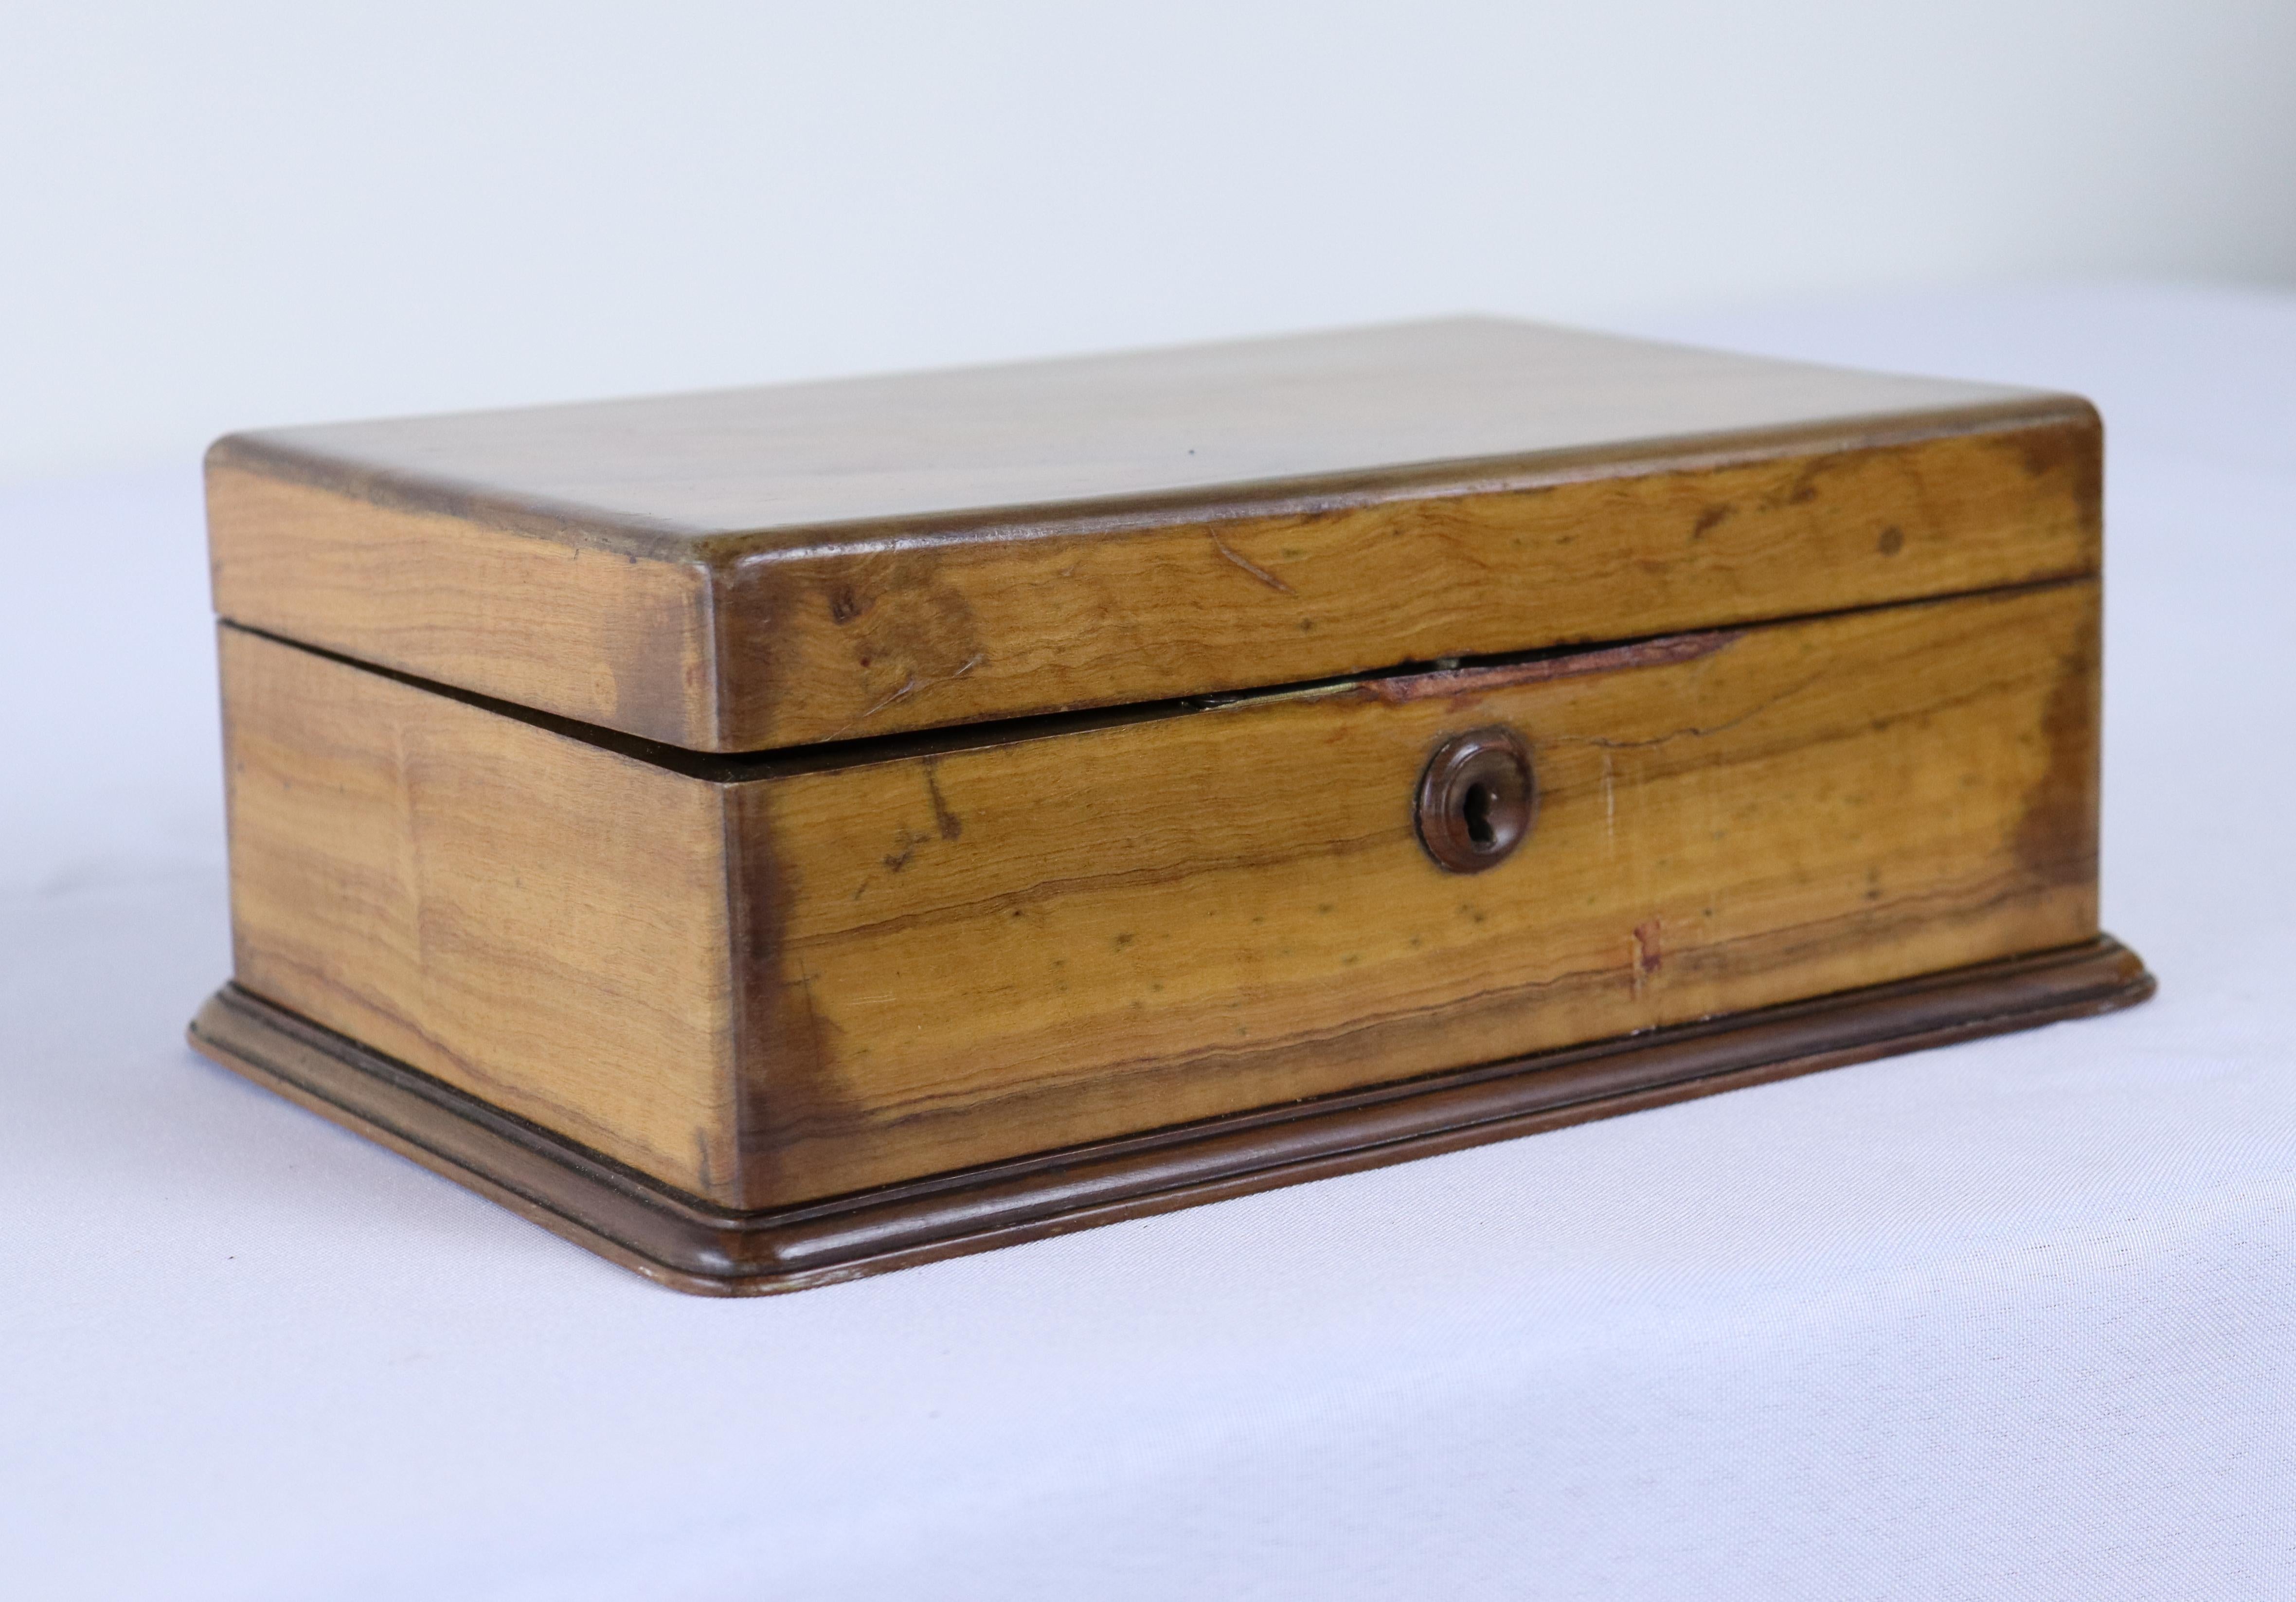 A small walnut box filled with checkers pieces, stained light and dark.  The box has wonderful walnut grain and patina.  There is some wear along the opening of the box, visible in the thumbnail photos.